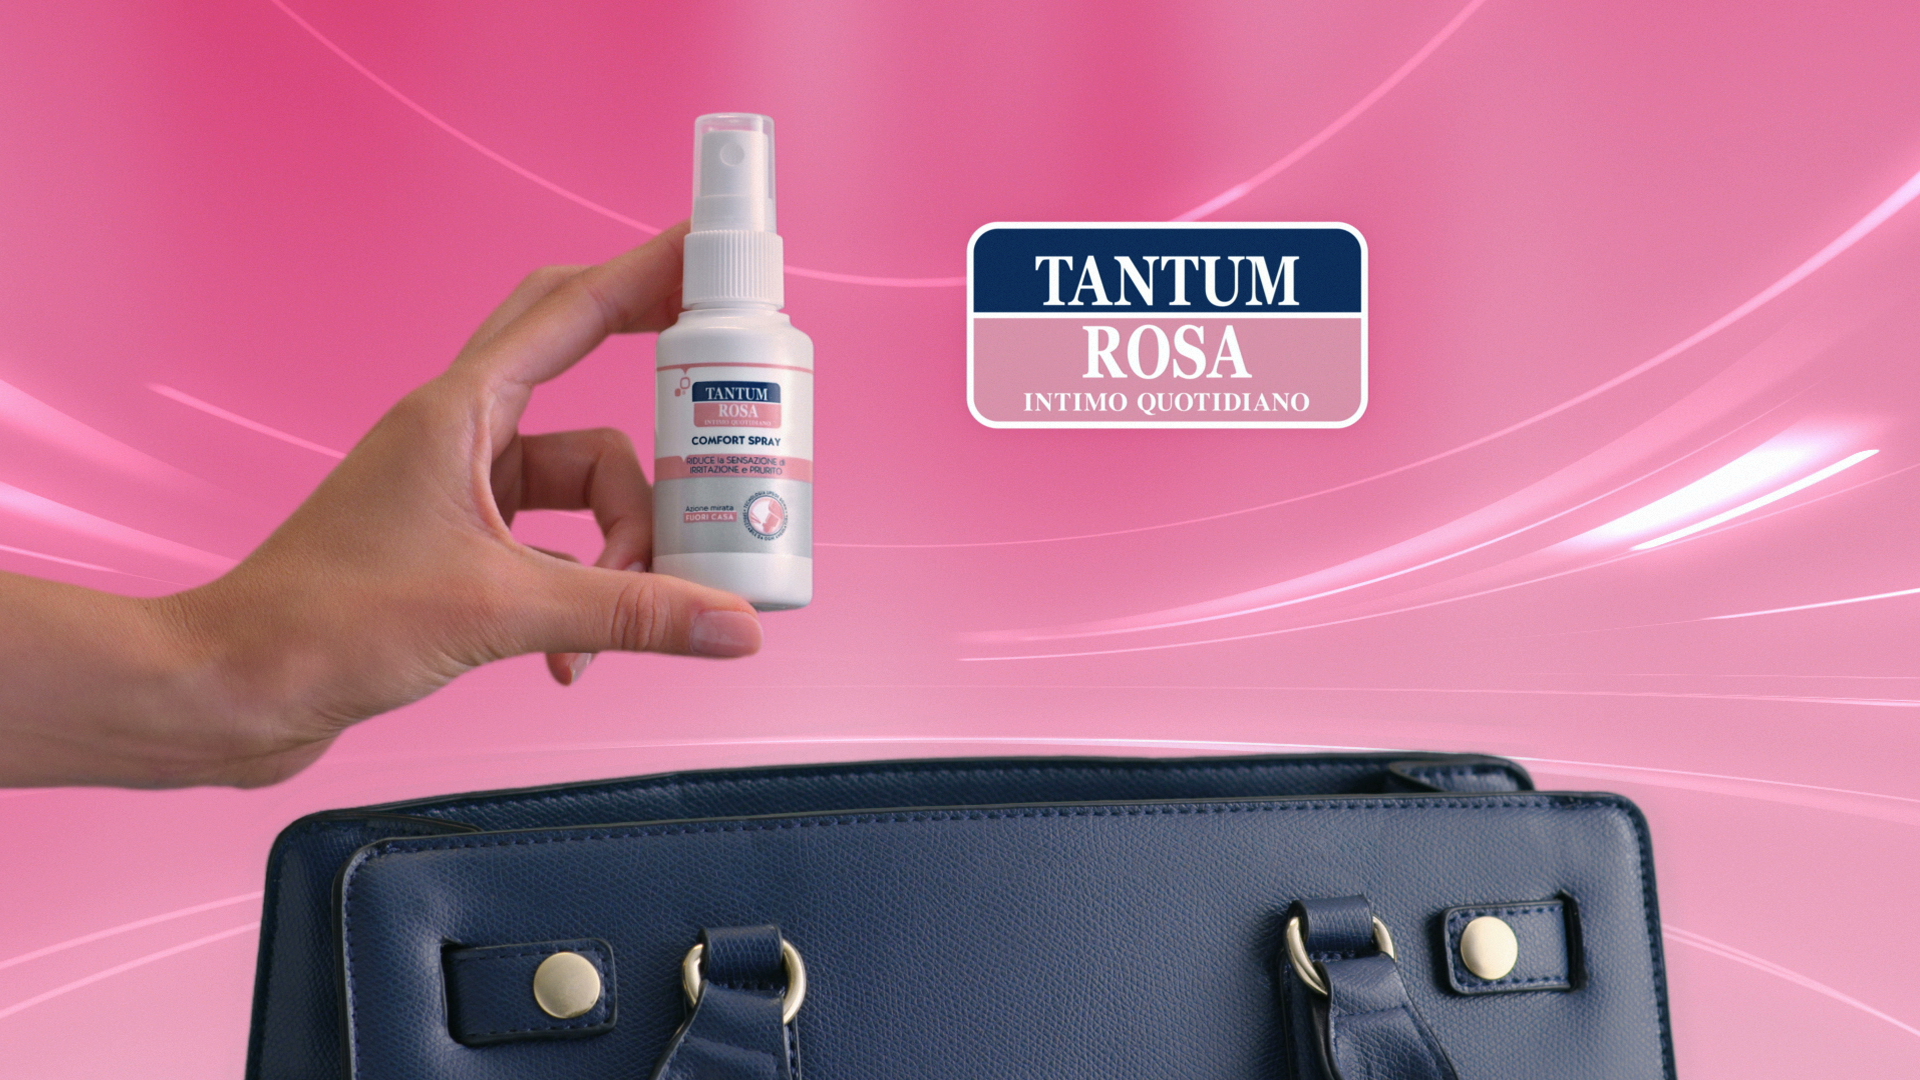 NEW TANTUM ROSA INTIMO QUOTIDIANO COMFORT SPRAY SPOT: RELIEF IS ROSE COLOURED WITH ARMANDO TESTA.